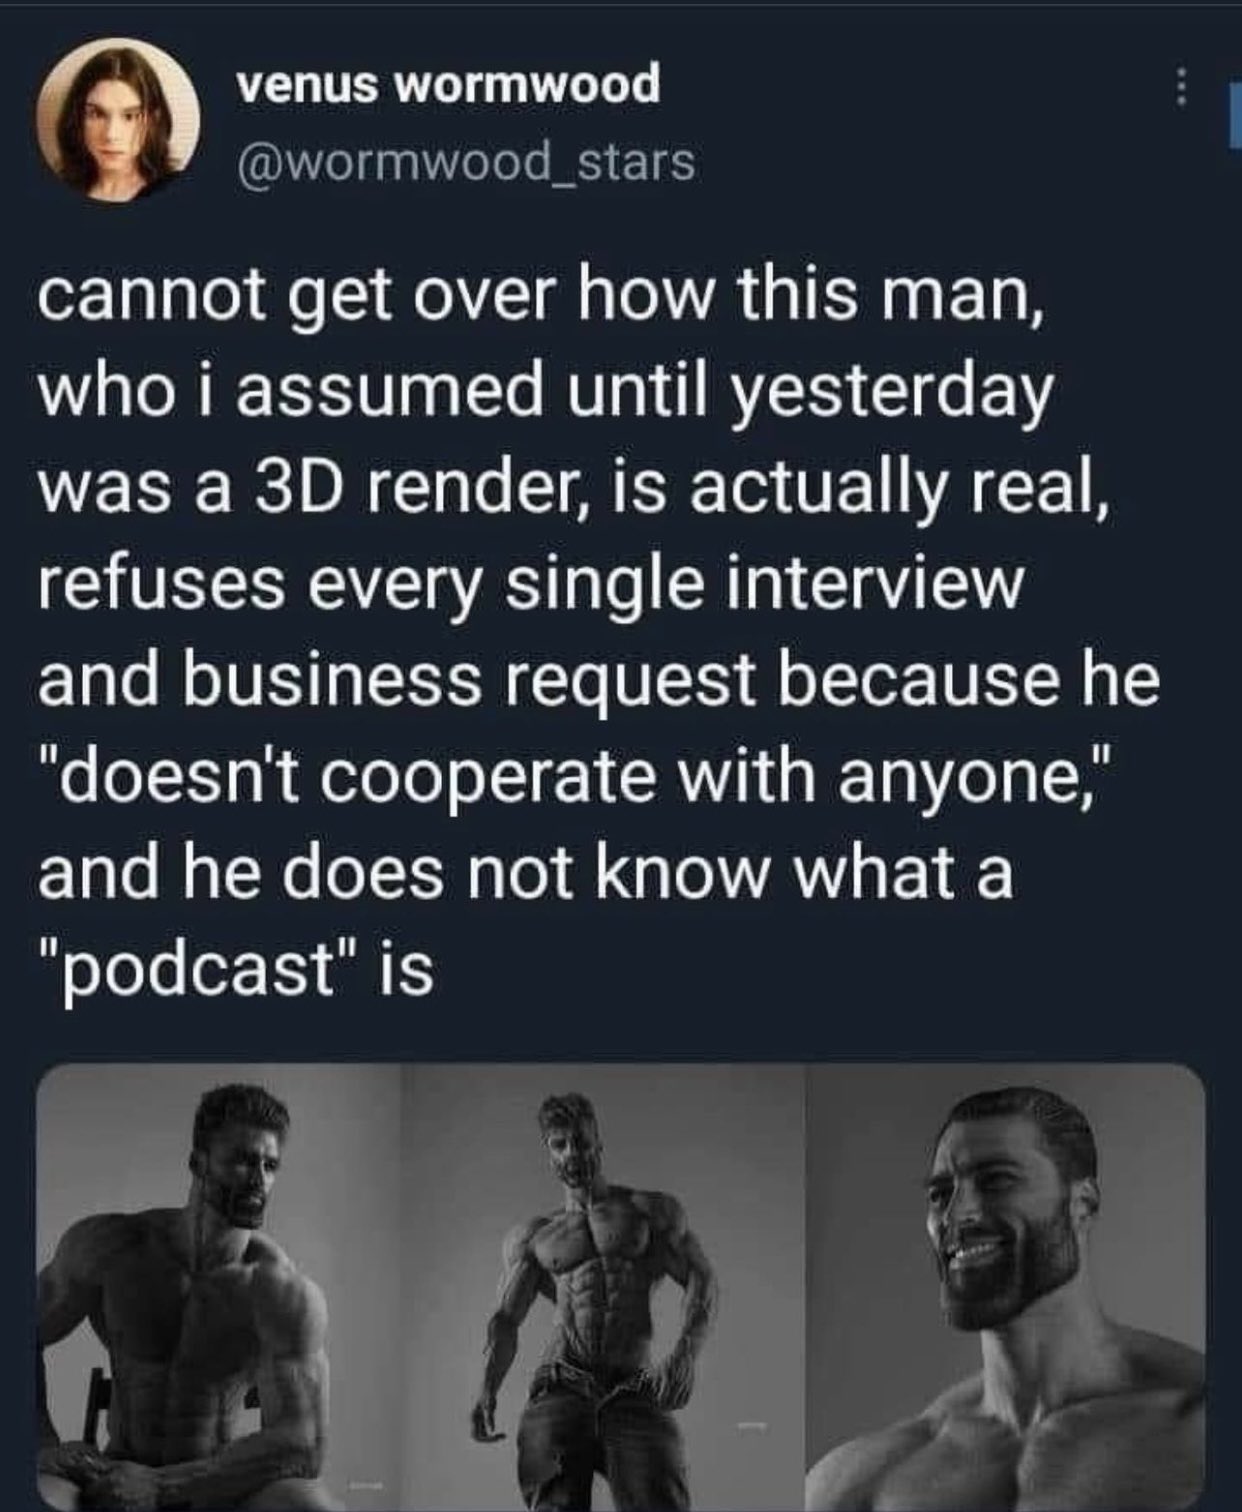 dudes posting their Ws - ernest khalimov ass - venus wormwood cannot get over how this man, who i assumed until yesterday was a 3D render, is actually real, refuses every single interview and business request because he